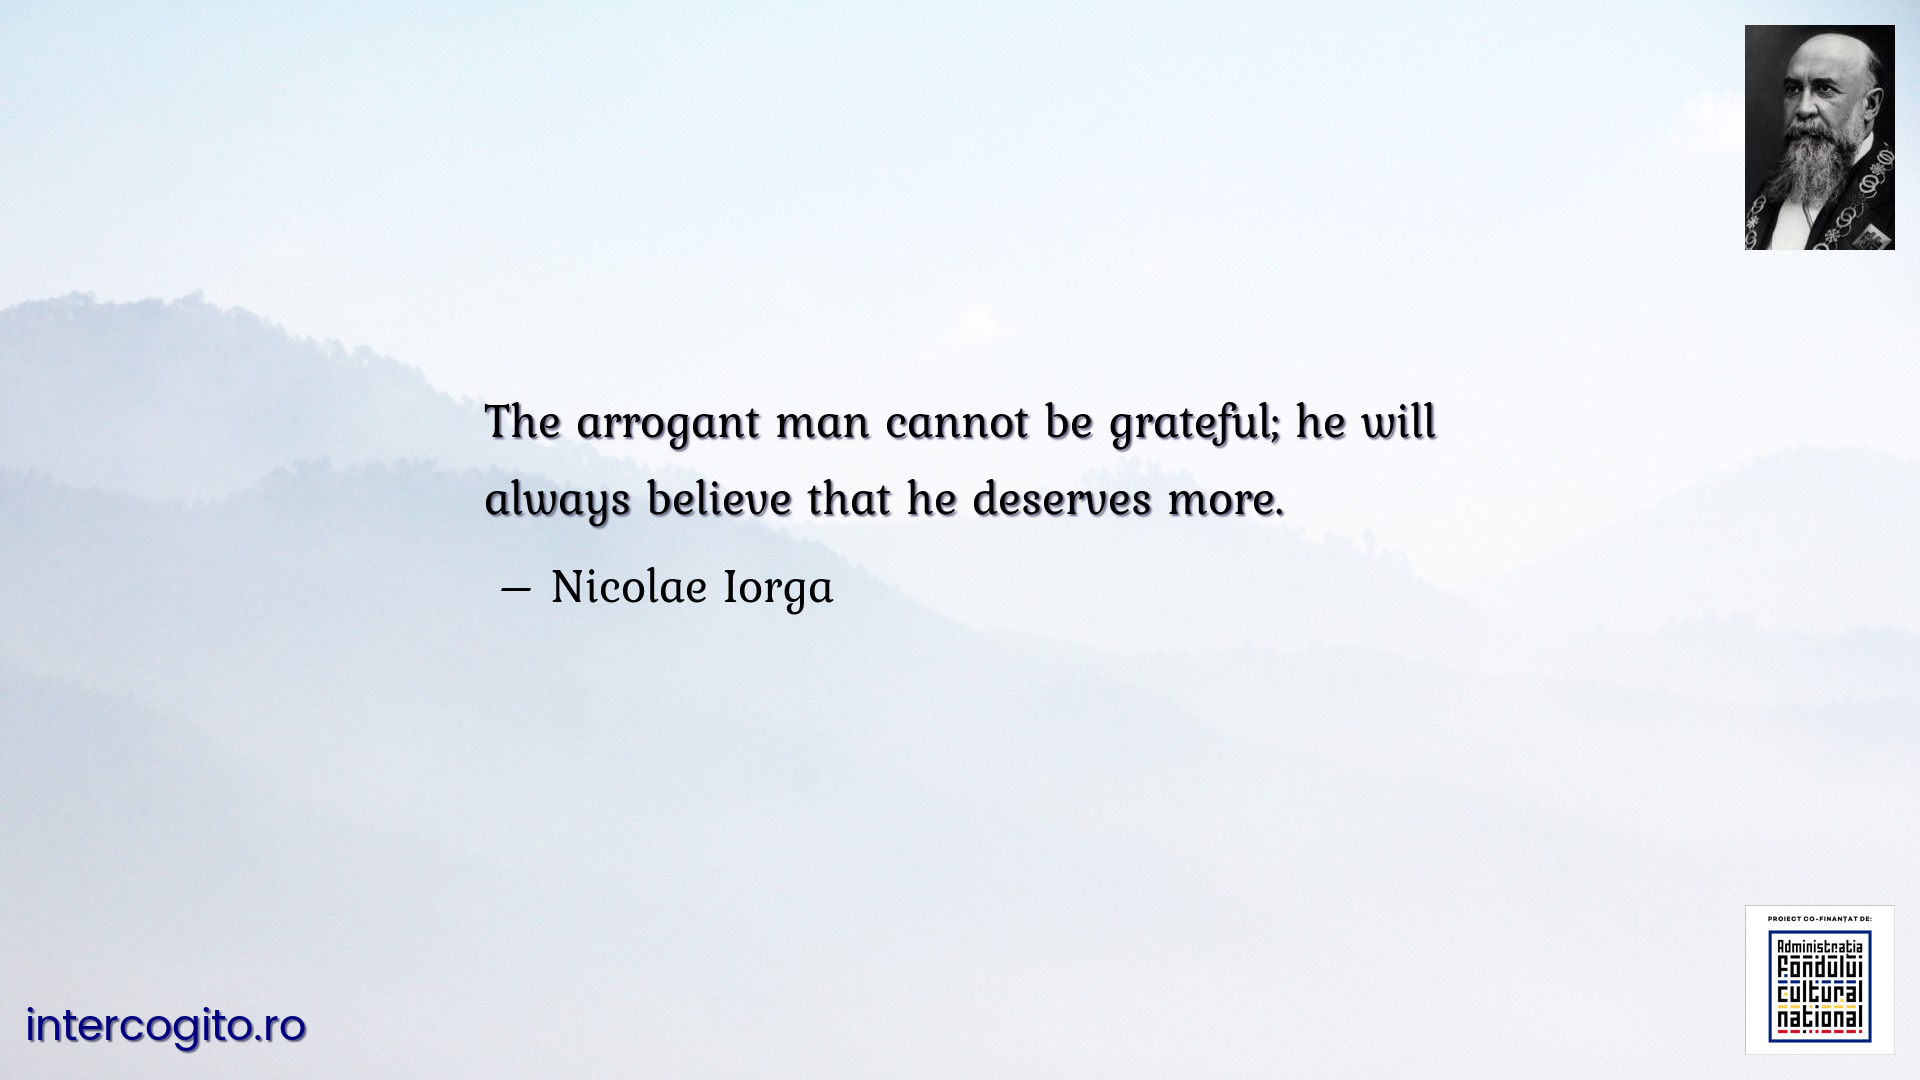 The arrogant man cannot be grateful; he will always believe that he deserves more.